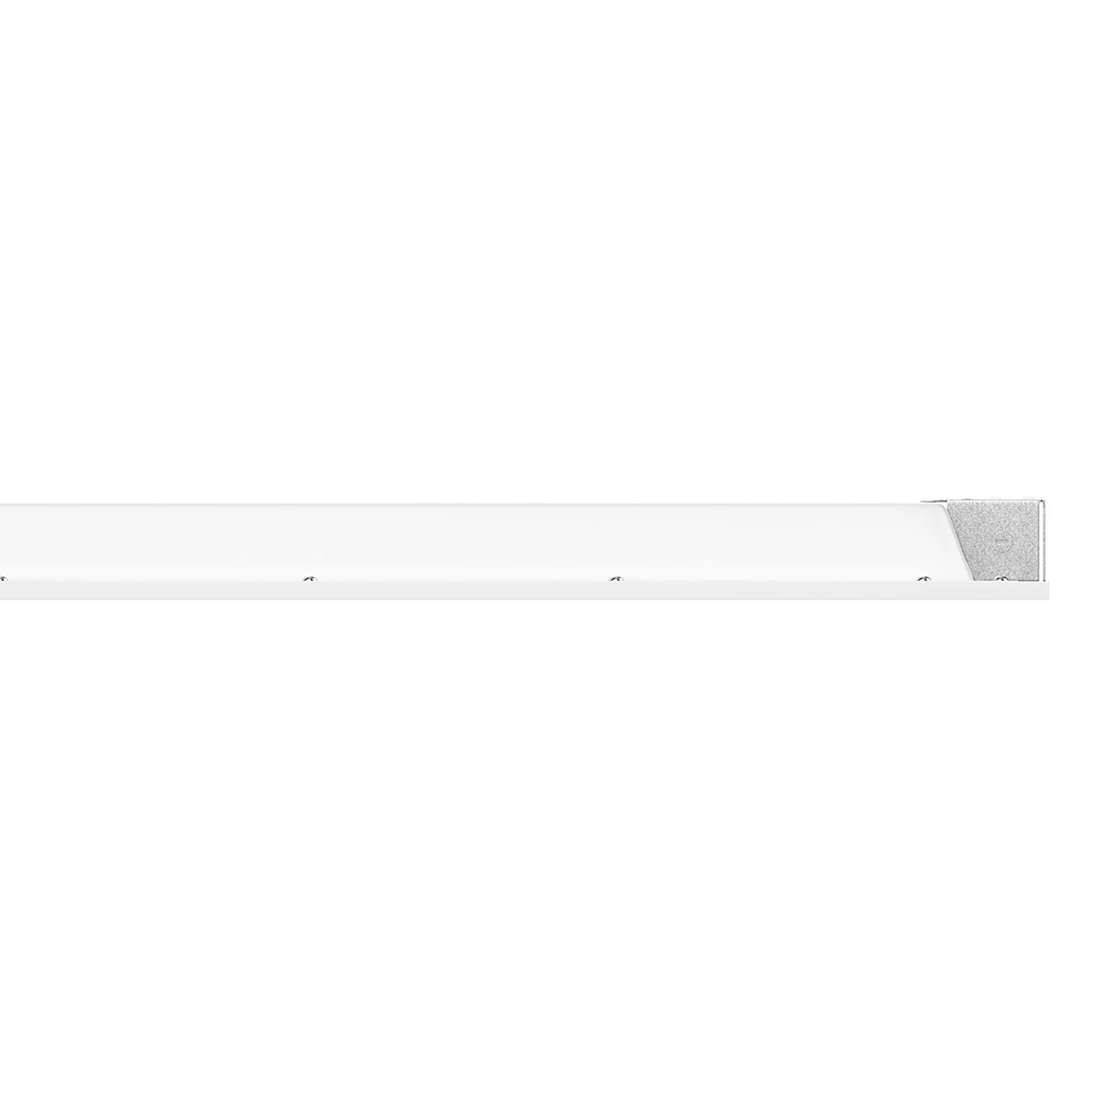 2x4 LED Flat Panel - 48W - 5000K, 6240 Lumens - Dimmable (2-Pack)